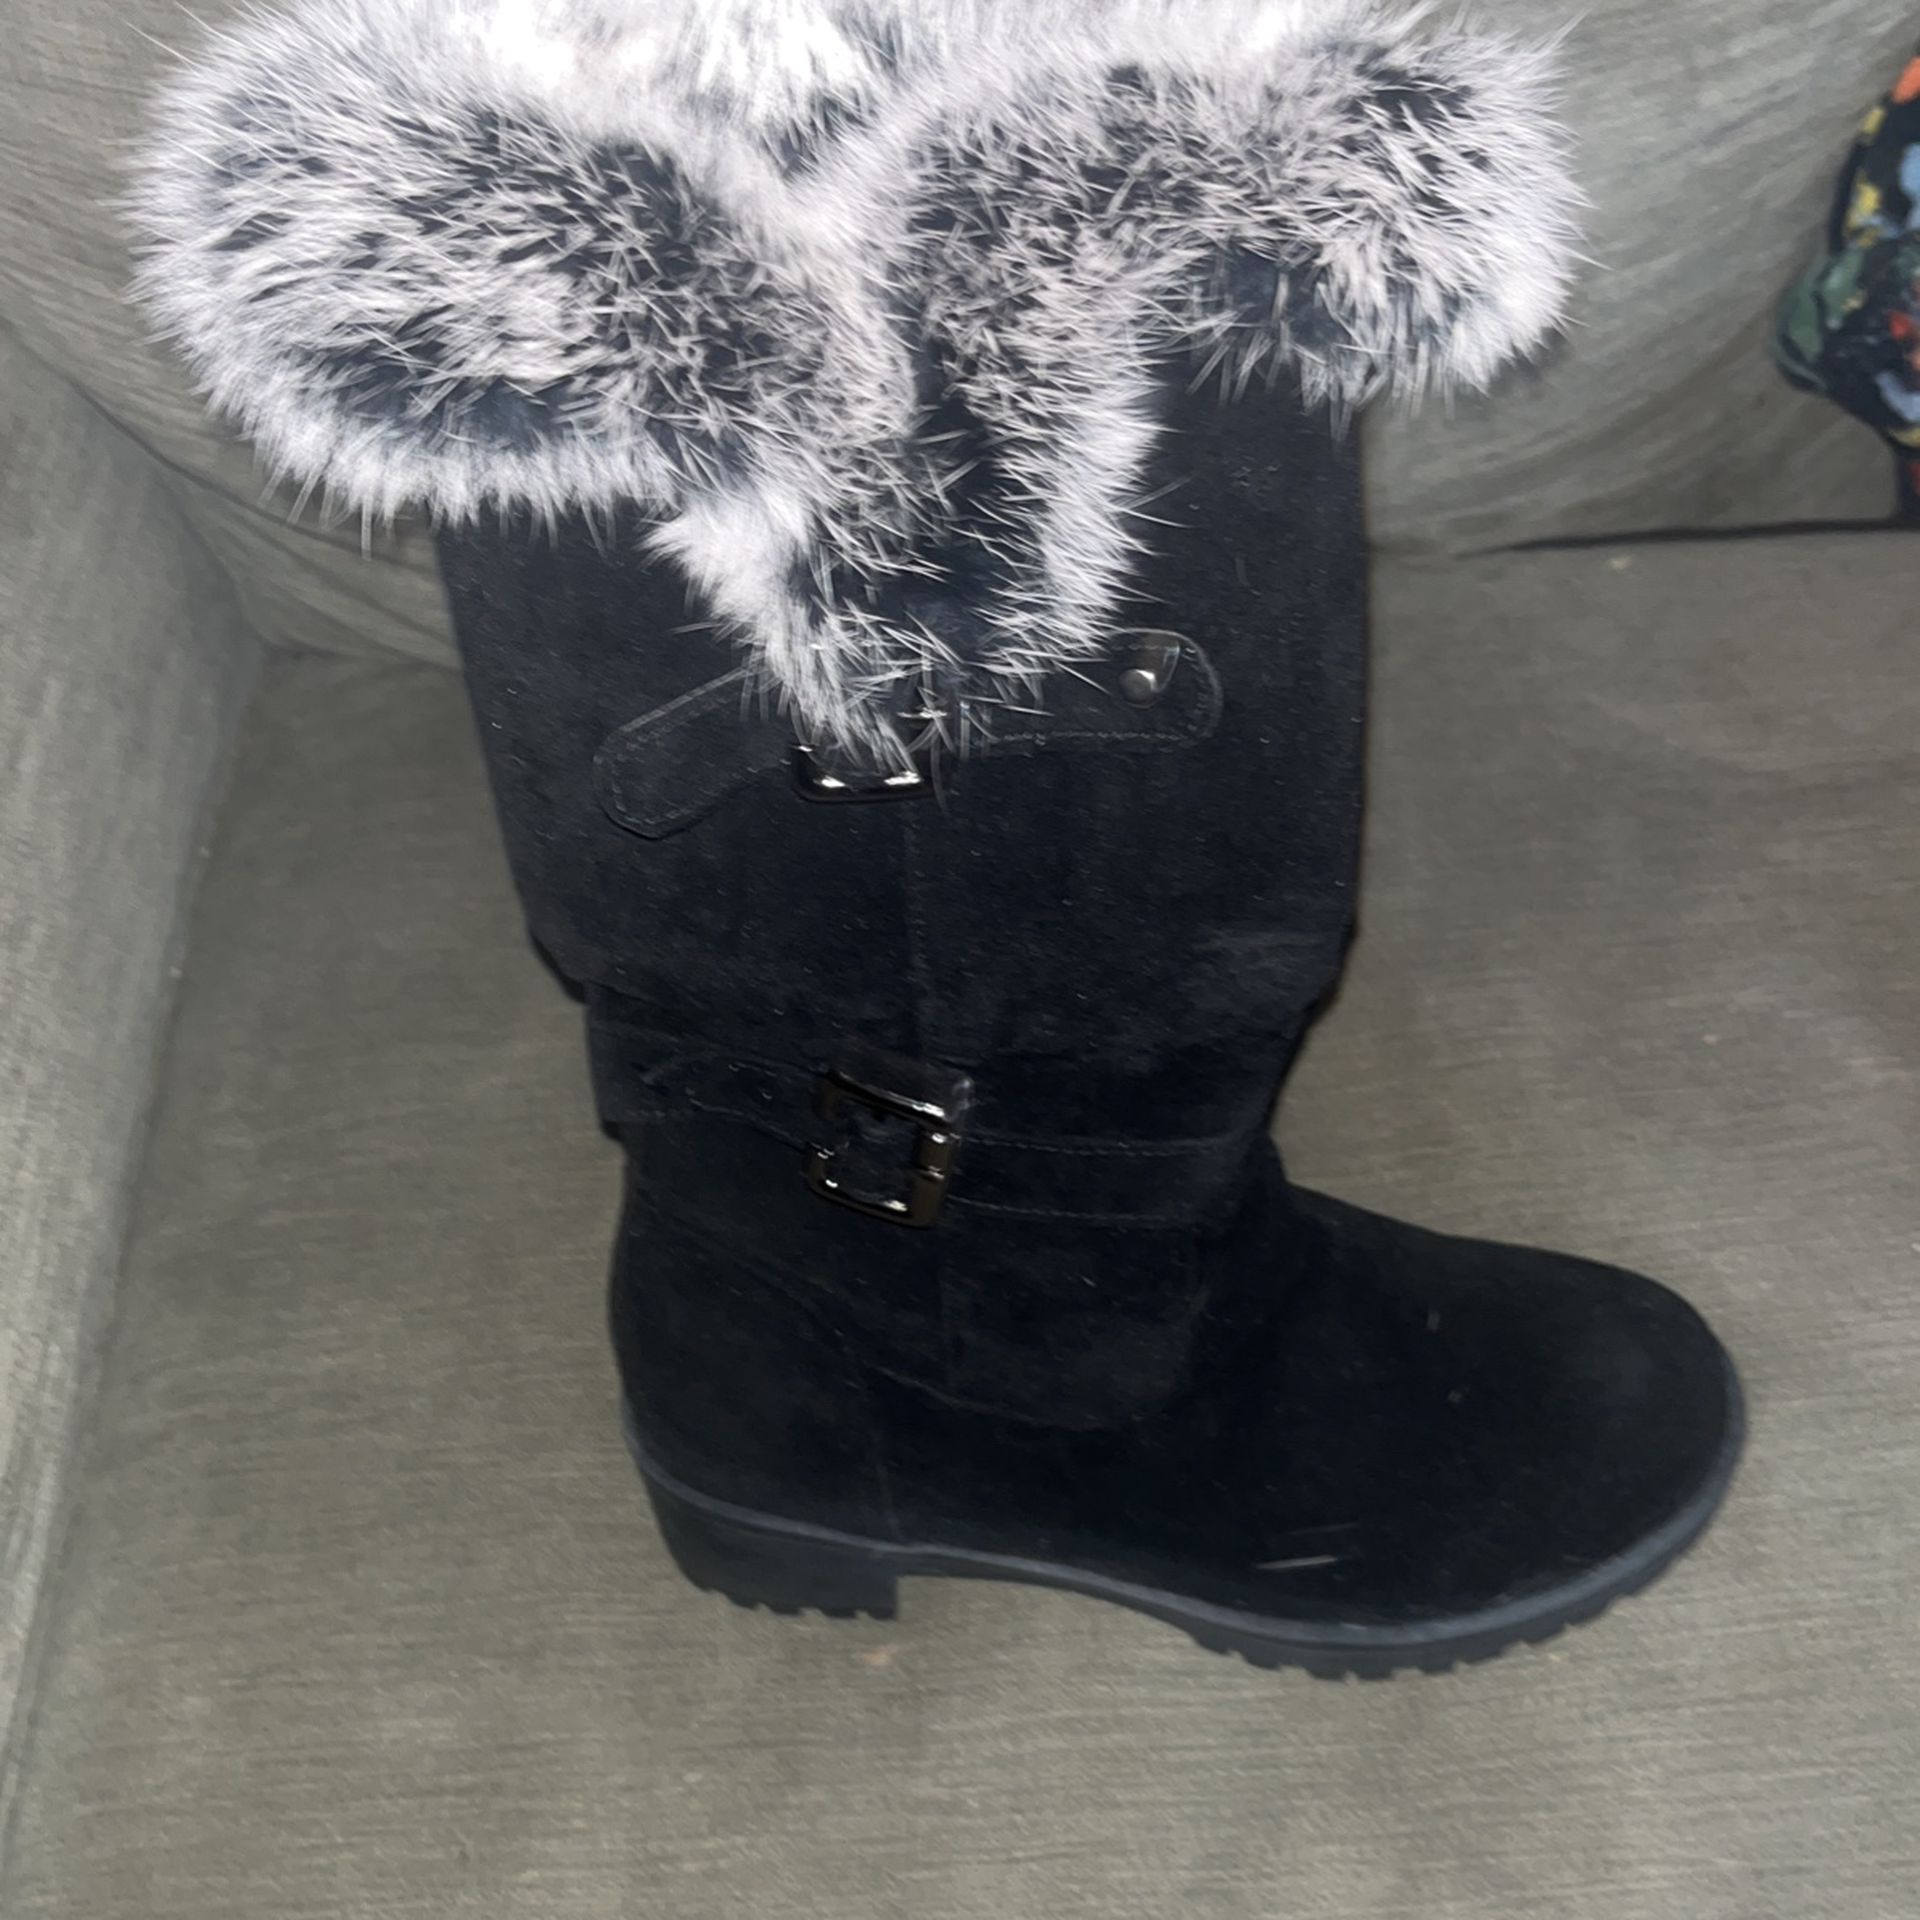 Size 7 Black Boots With Faux Fur Lining